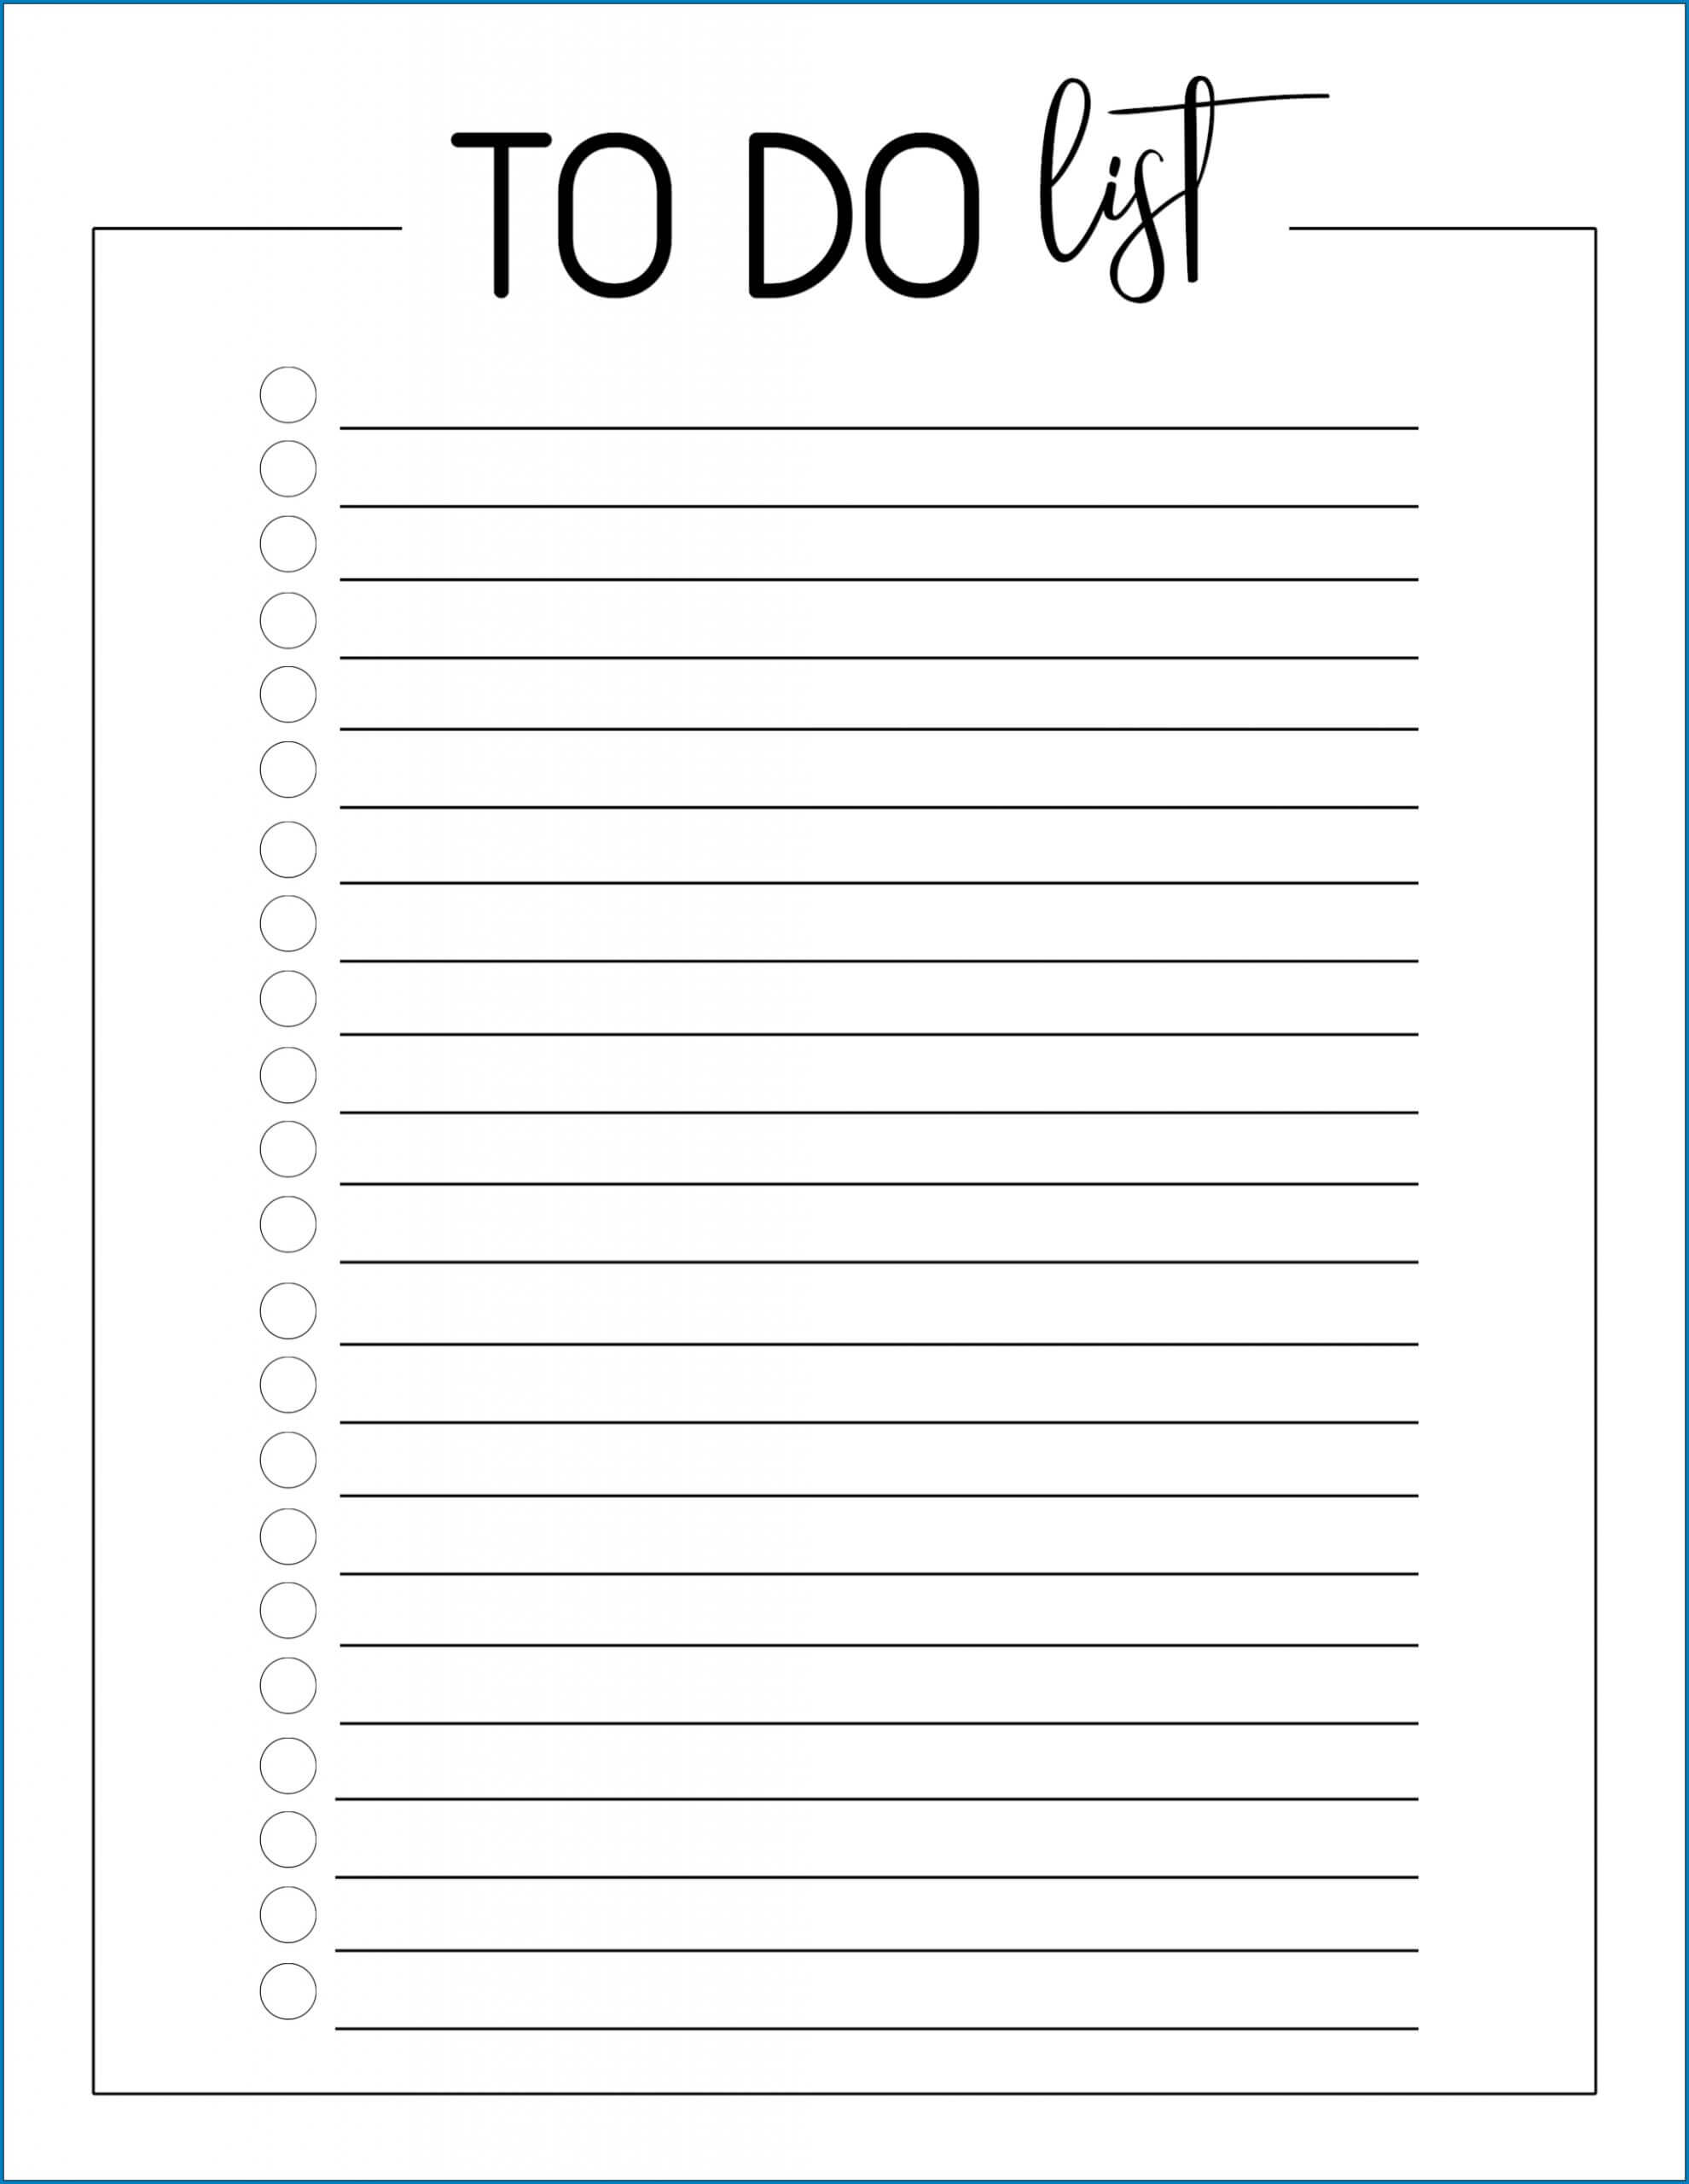 √ Free To Do List Printable Template | Templateral With Blank To Do List Template